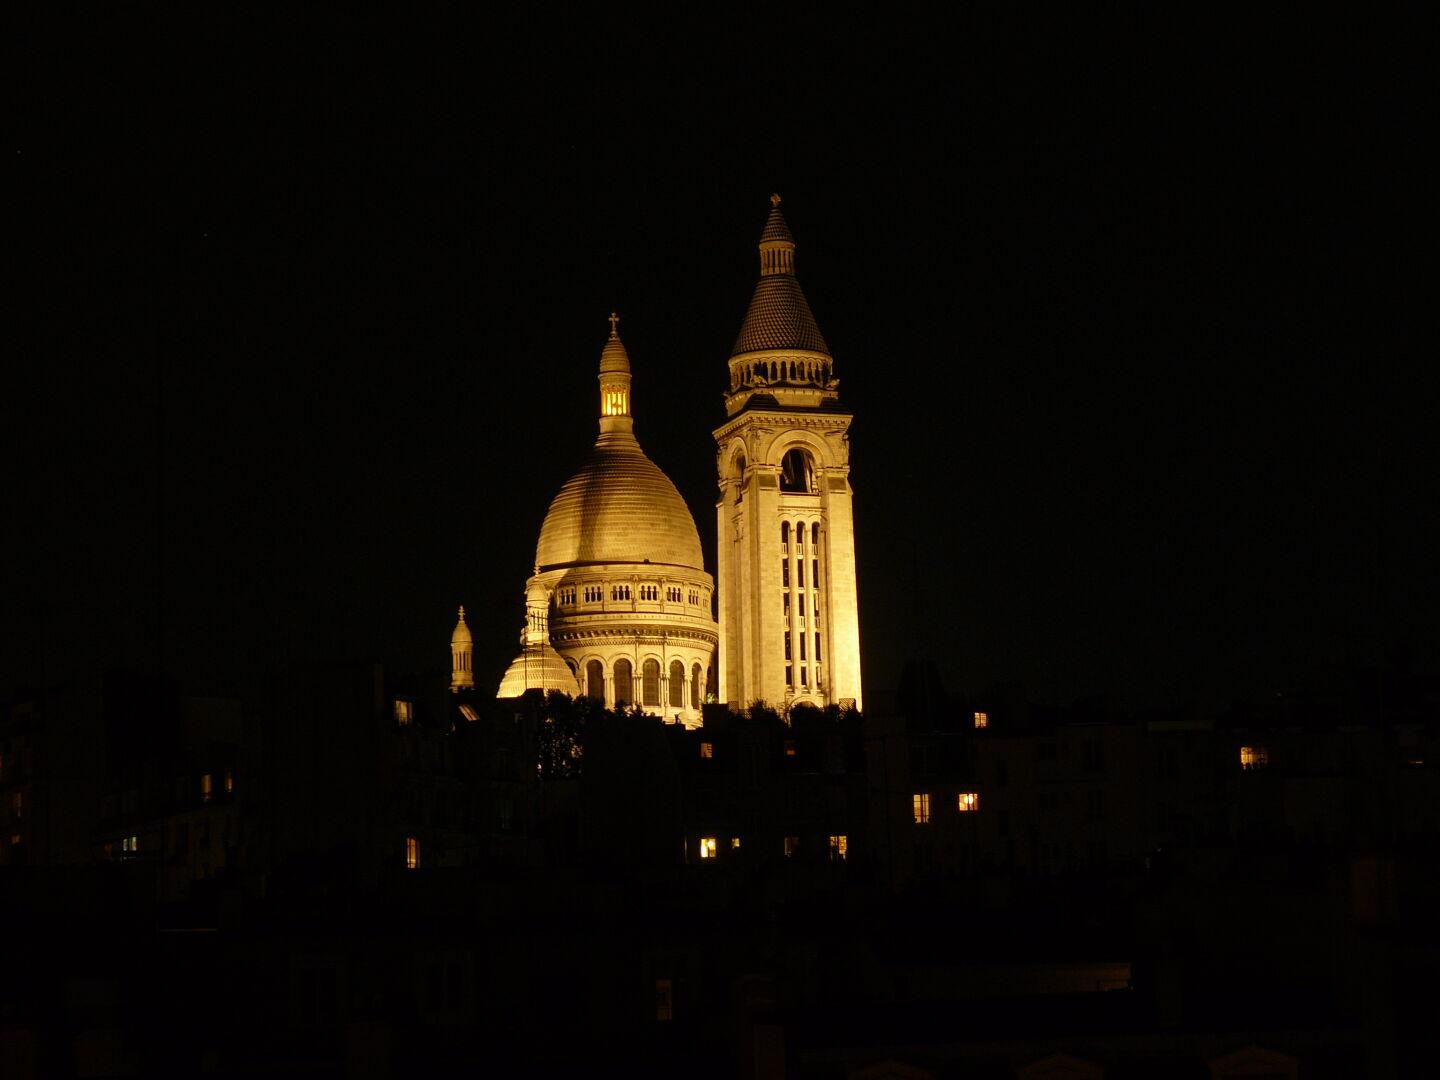 Sacre Coeur by night, from the window of our hostel room.